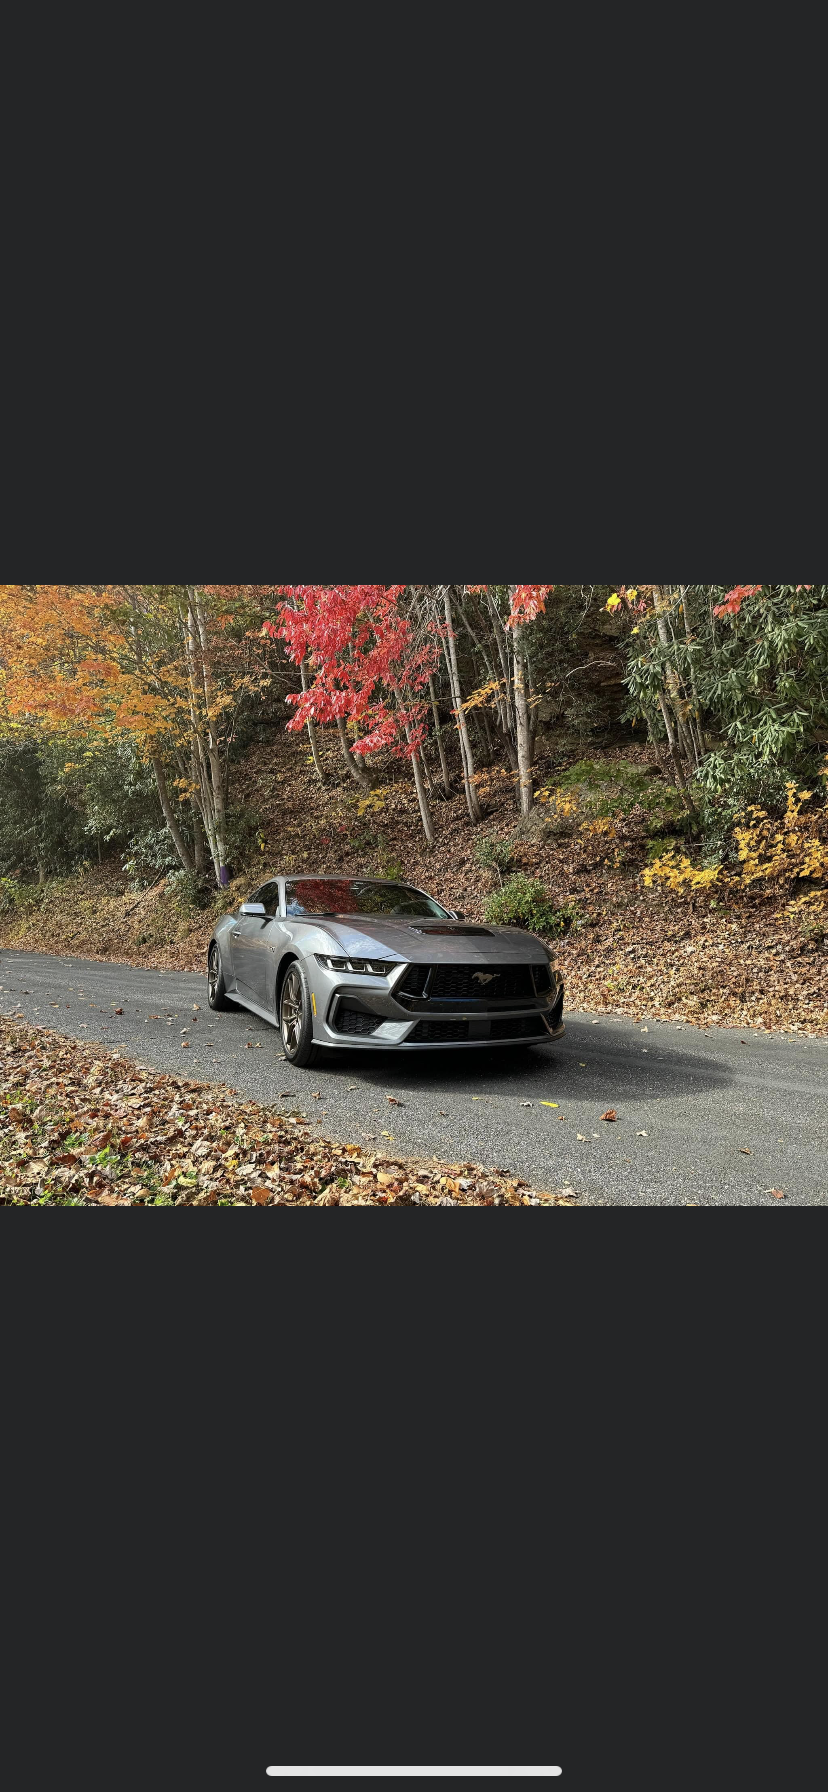 S650 Mustang Official CARBONIZED GRAY Mustang S650 Thread IMG-1346.PNG